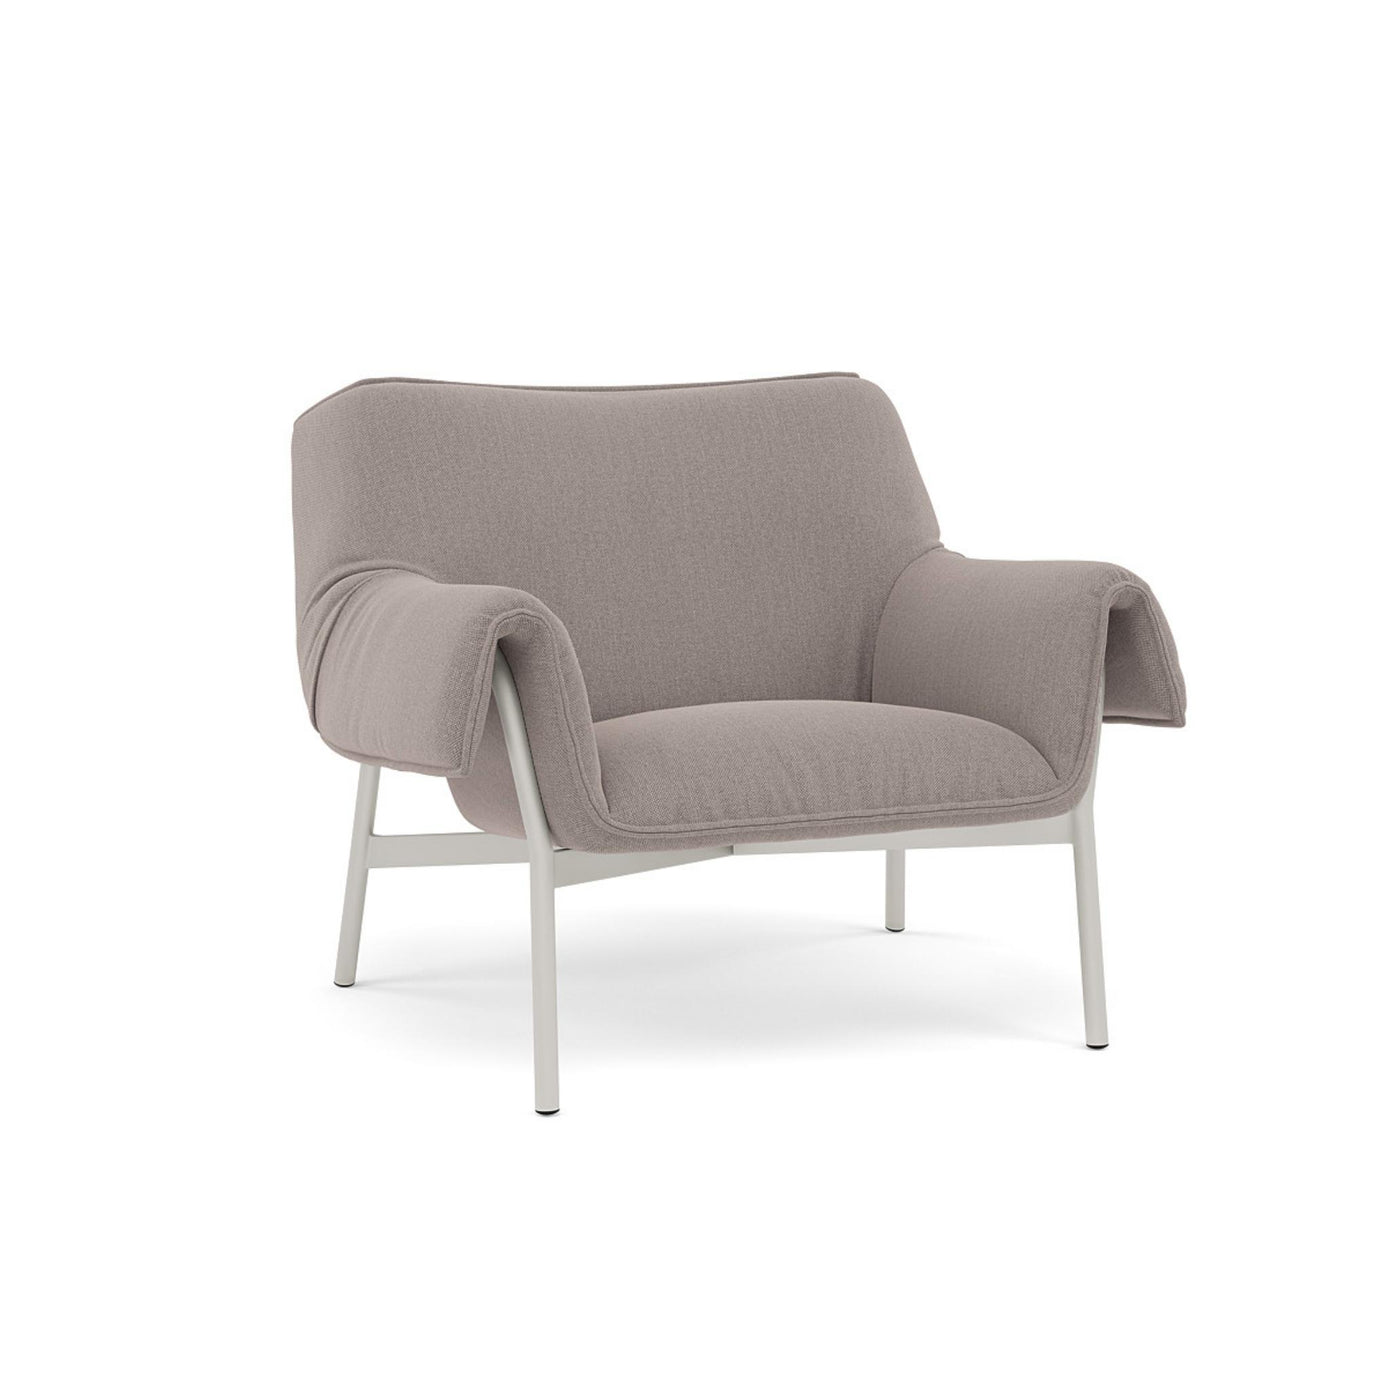 Muuto Wrap Lounge Chair. Made to order from someday designs. #colour_re-wool-628